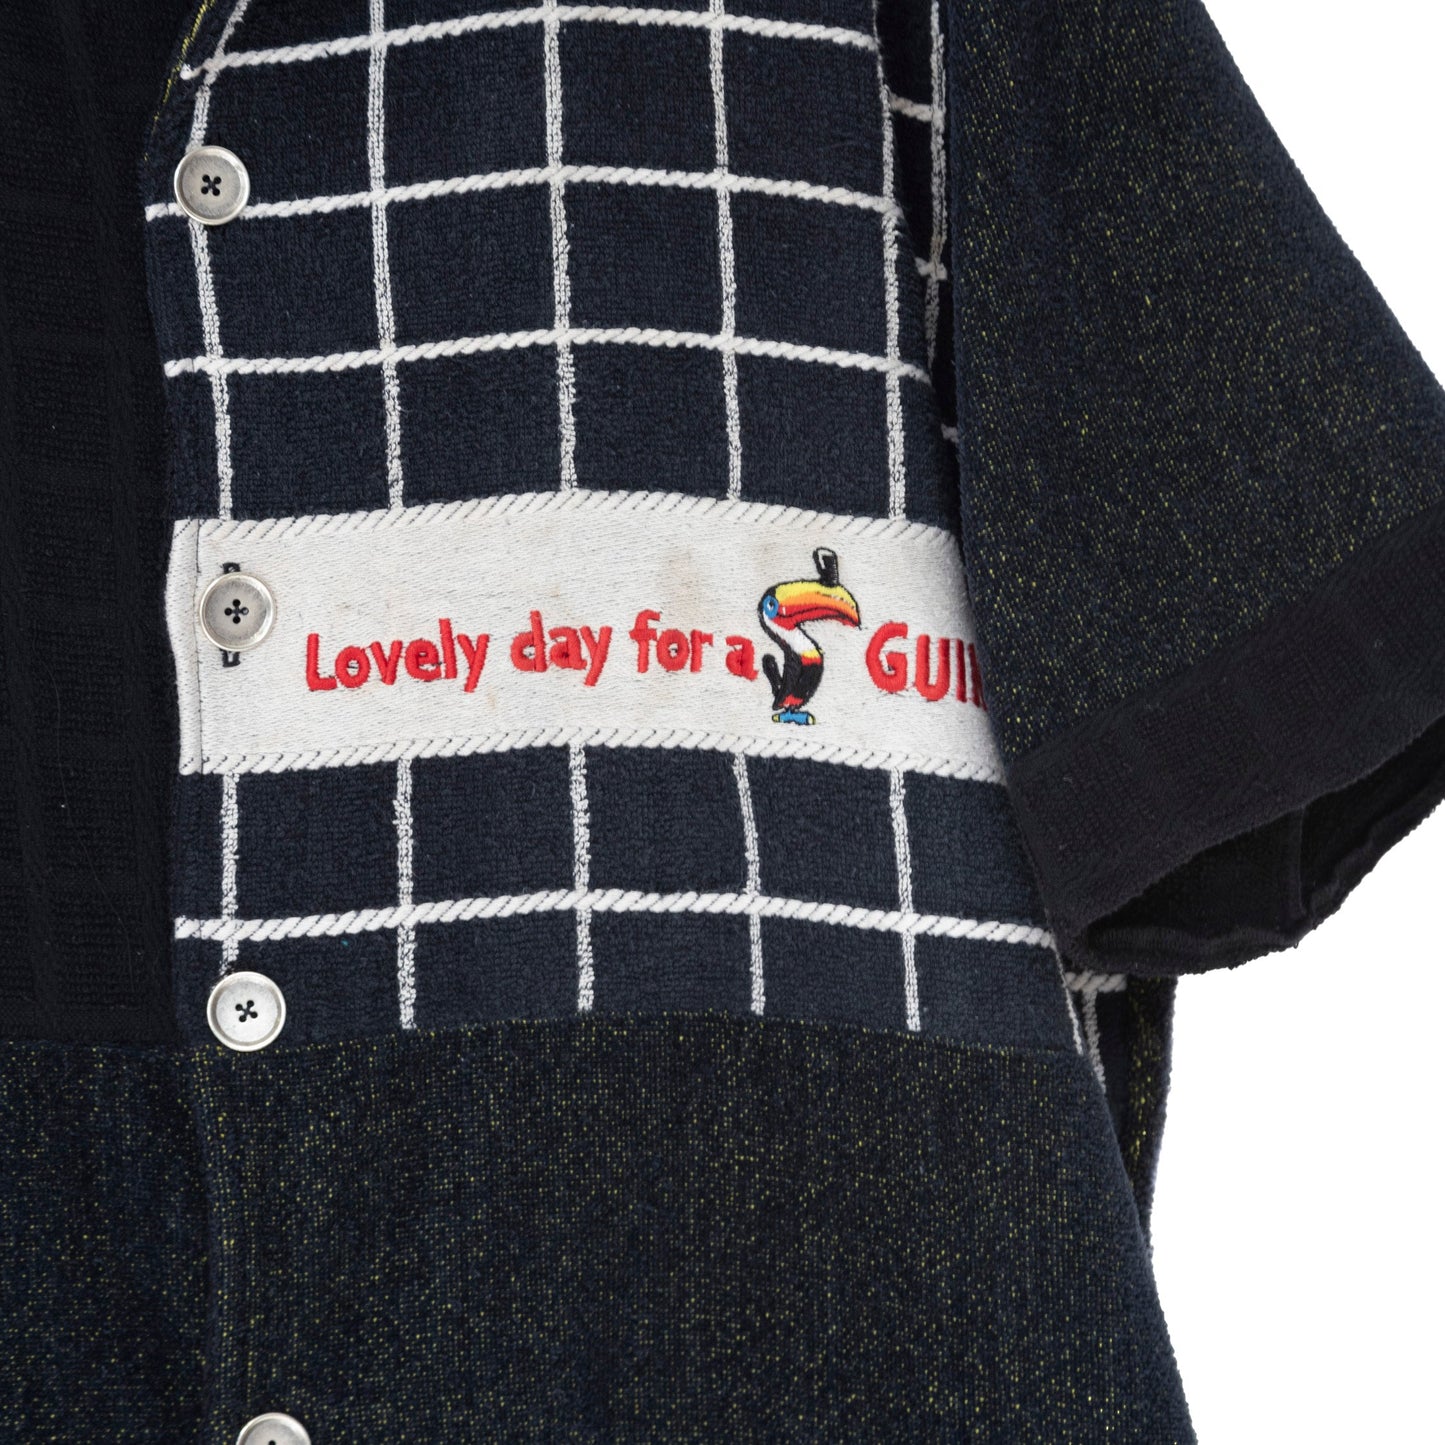 VT Rework: 'Lovely day for a Guiness' Towellin Shirt